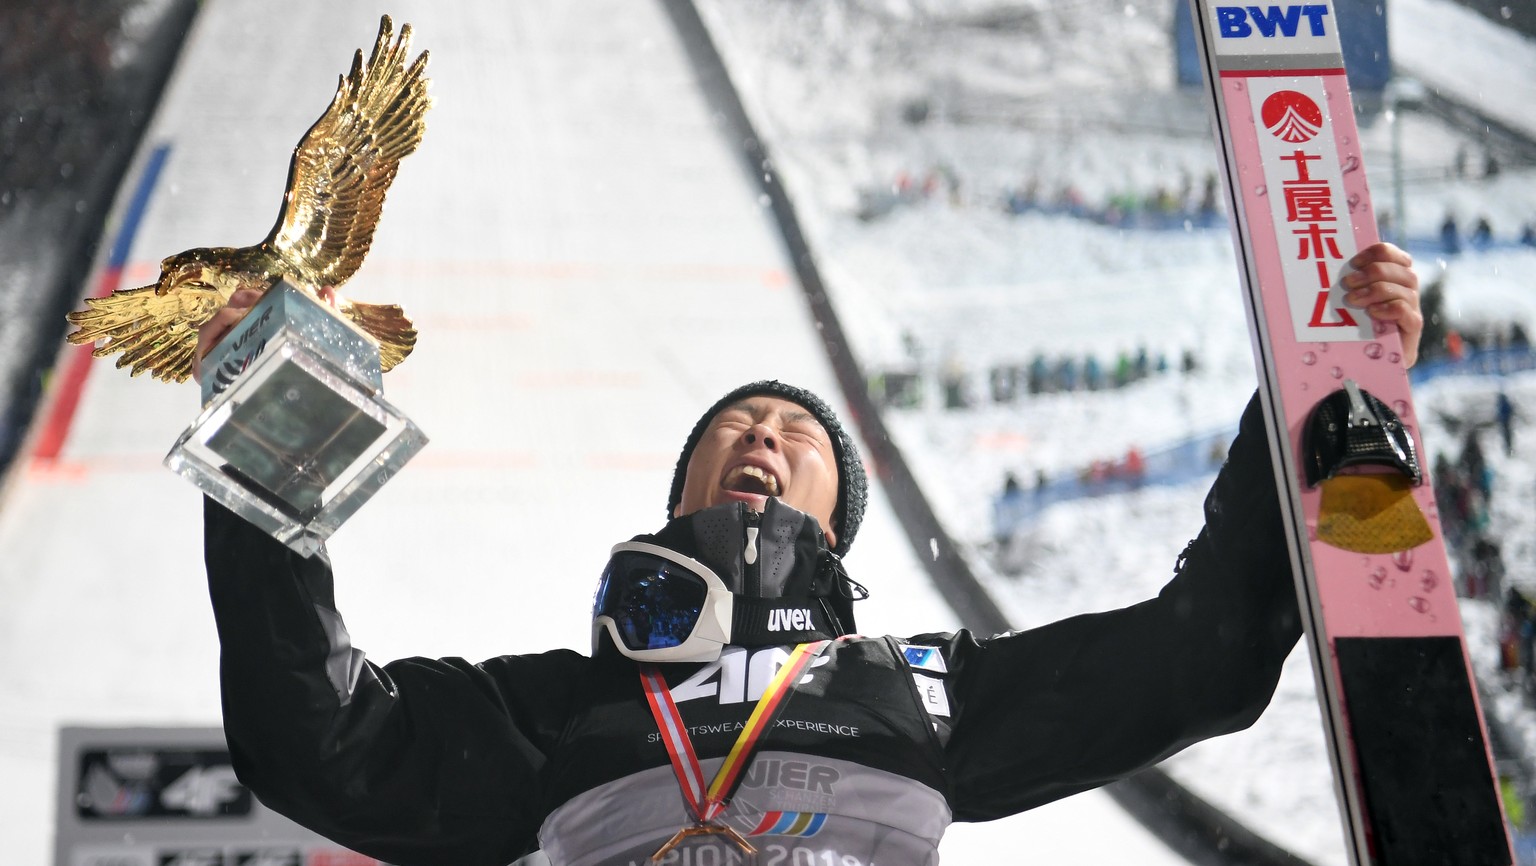 epa07265944 Ryoyu Kobayashi from Japan celebrates with the trophy after winning the 67th Four Hills Tournament competition in Bischofshofen, Austria, 06 January 2018. EPA/CHRISTIAN BRUNA